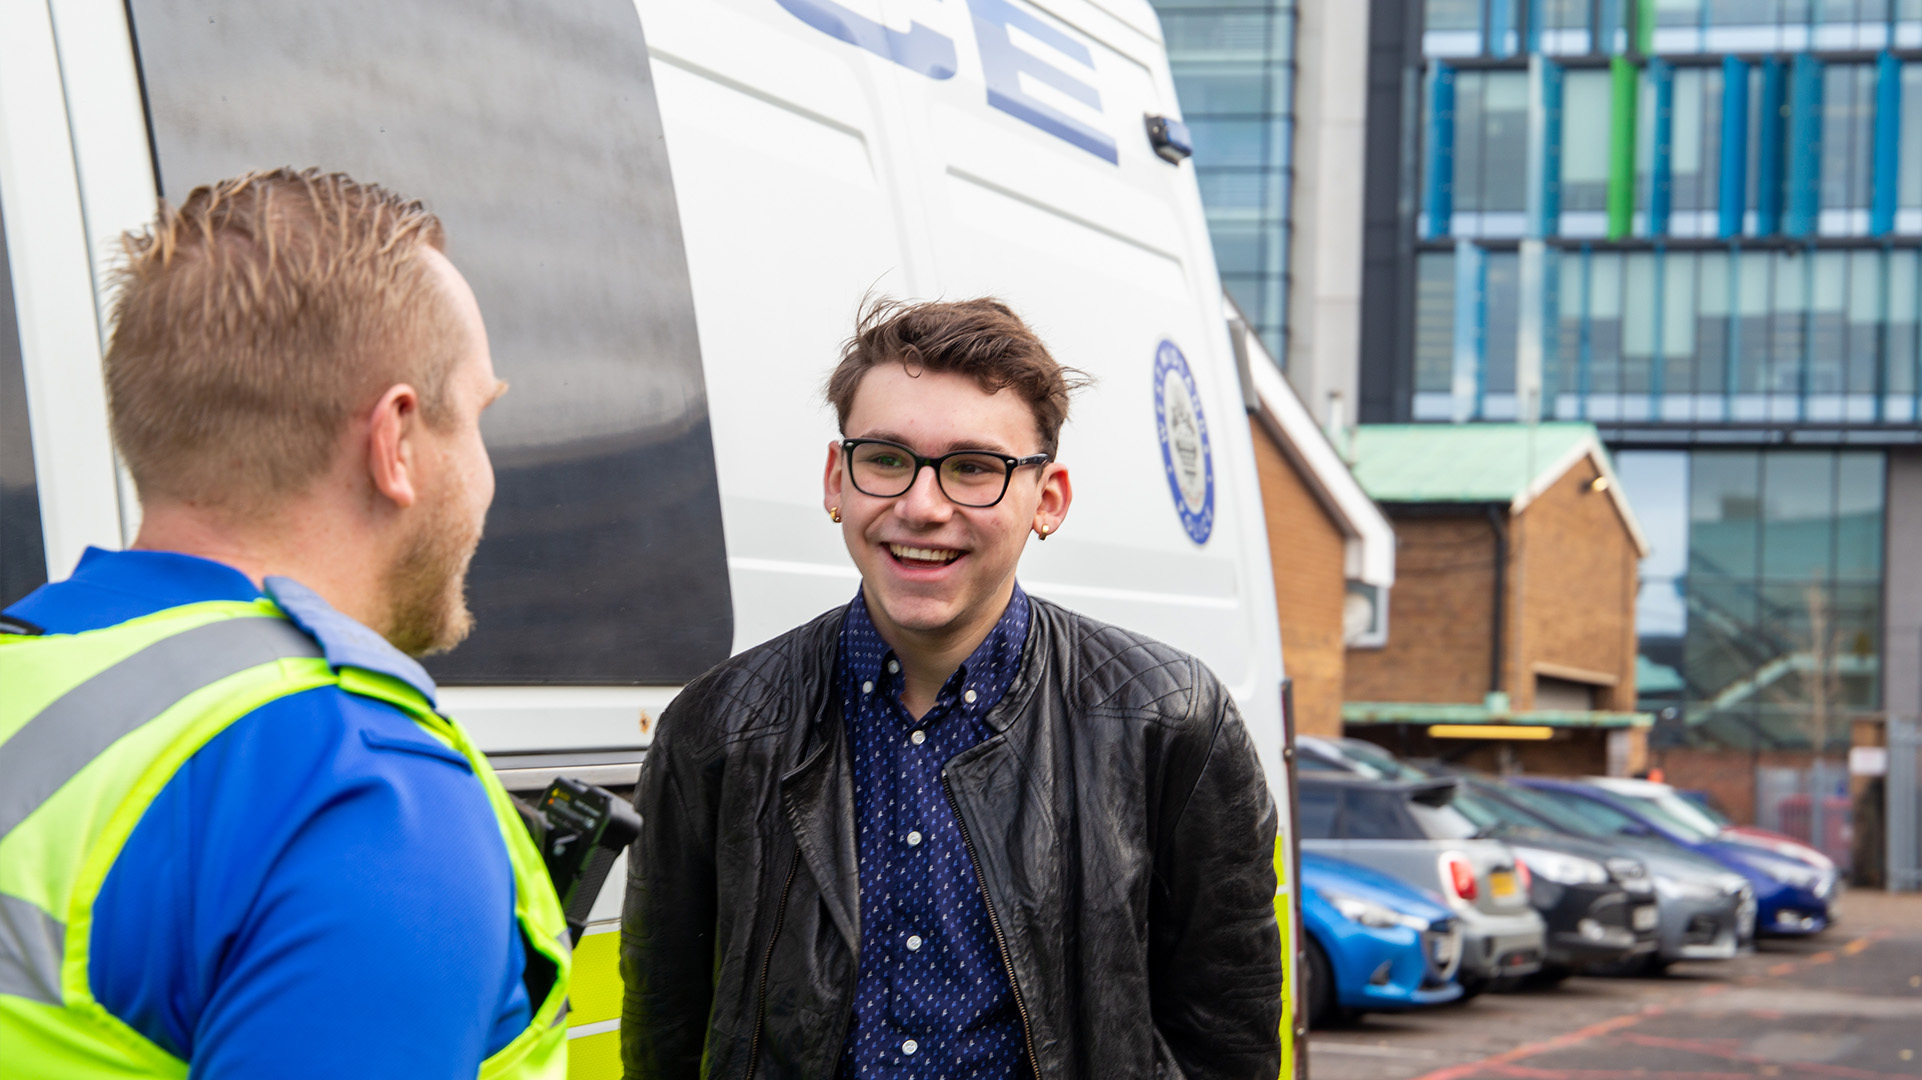 A Policing student talking to a police officer beside a police van